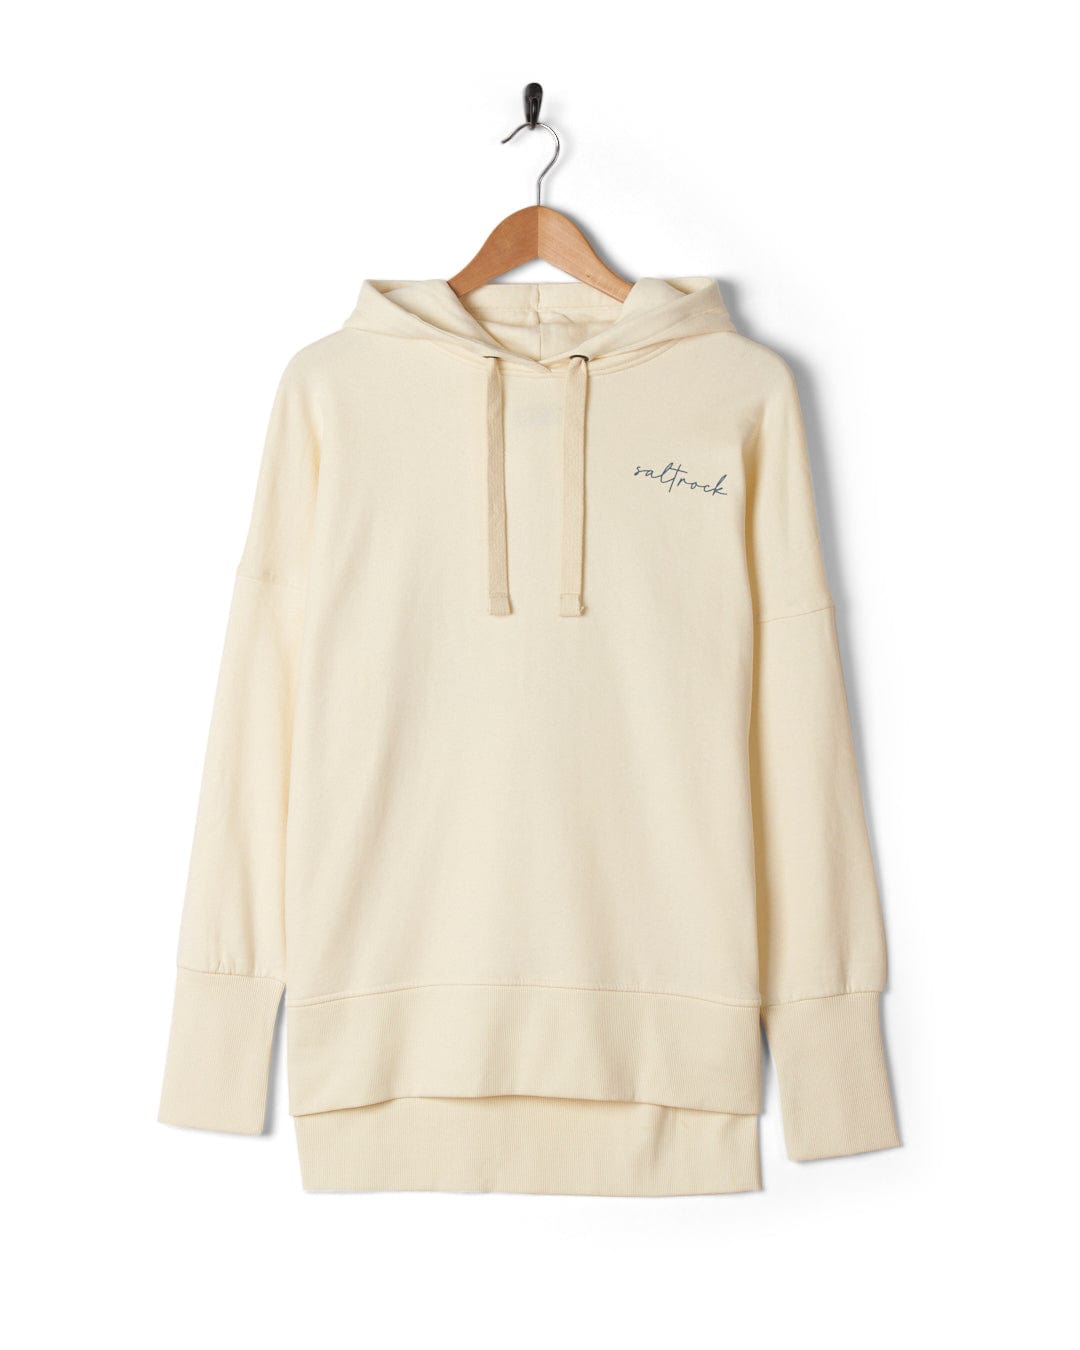 Cream-colored Poster - Womens Pop Hoodie with Saltrock branding hanging on a wooden hanger against a white background.